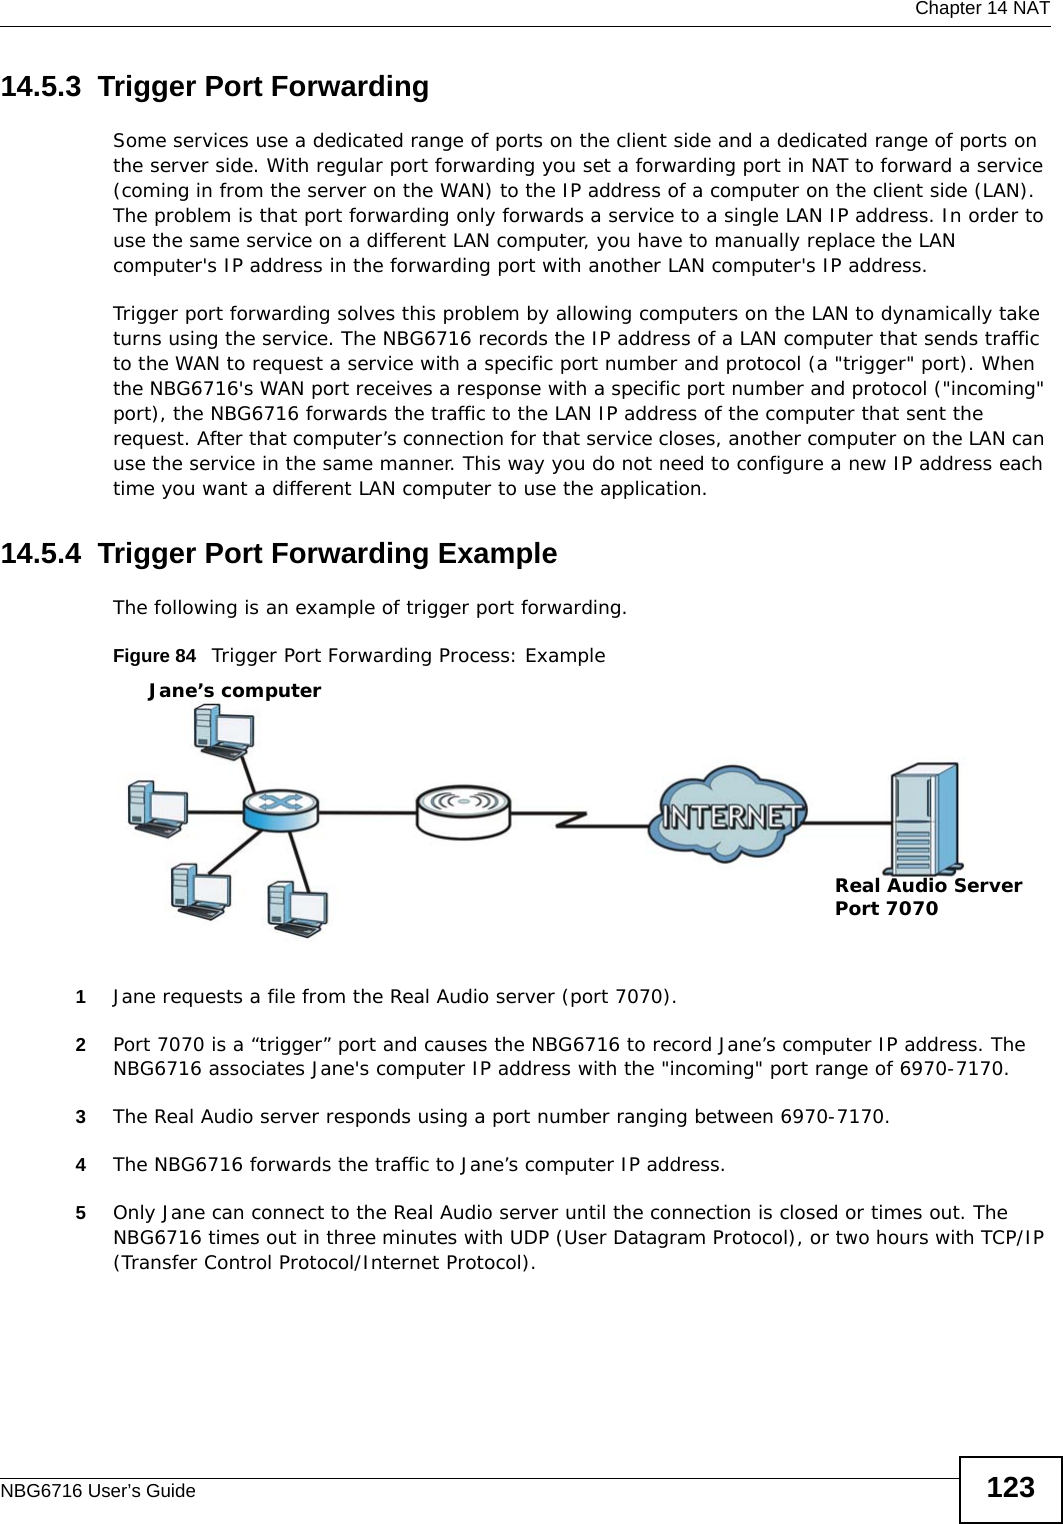  Chapter 14 NATNBG6716 User’s Guide 12314.5.3  Trigger Port Forwarding Some services use a dedicated range of ports on the client side and a dedicated range of ports on the server side. With regular port forwarding you set a forwarding port in NAT to forward a service (coming in from the server on the WAN) to the IP address of a computer on the client side (LAN). The problem is that port forwarding only forwards a service to a single LAN IP address. In order to use the same service on a different LAN computer, you have to manually replace the LAN computer&apos;s IP address in the forwarding port with another LAN computer&apos;s IP address. Trigger port forwarding solves this problem by allowing computers on the LAN to dynamically take turns using the service. The NBG6716 records the IP address of a LAN computer that sends traffic to the WAN to request a service with a specific port number and protocol (a &quot;trigger&quot; port). When the NBG6716&apos;s WAN port receives a response with a specific port number and protocol (&quot;incoming&quot; port), the NBG6716 forwards the traffic to the LAN IP address of the computer that sent the request. After that computer’s connection for that service closes, another computer on the LAN can use the service in the same manner. This way you do not need to configure a new IP address each time you want a different LAN computer to use the application.14.5.4  Trigger Port Forwarding Example The following is an example of trigger port forwarding.Figure 84   Trigger Port Forwarding Process: Example1Jane requests a file from the Real Audio server (port 7070).2Port 7070 is a “trigger” port and causes the NBG6716 to record Jane’s computer IP address. The NBG6716 associates Jane&apos;s computer IP address with the &quot;incoming&quot; port range of 6970-7170.3The Real Audio server responds using a port number ranging between 6970-7170.4The NBG6716 forwards the traffic to Jane’s computer IP address. 5Only Jane can connect to the Real Audio server until the connection is closed or times out. The NBG6716 times out in three minutes with UDP (User Datagram Protocol), or two hours with TCP/IP (Transfer Control Protocol/Internet Protocol). Jane’s computerReal Audio ServerPort 7070